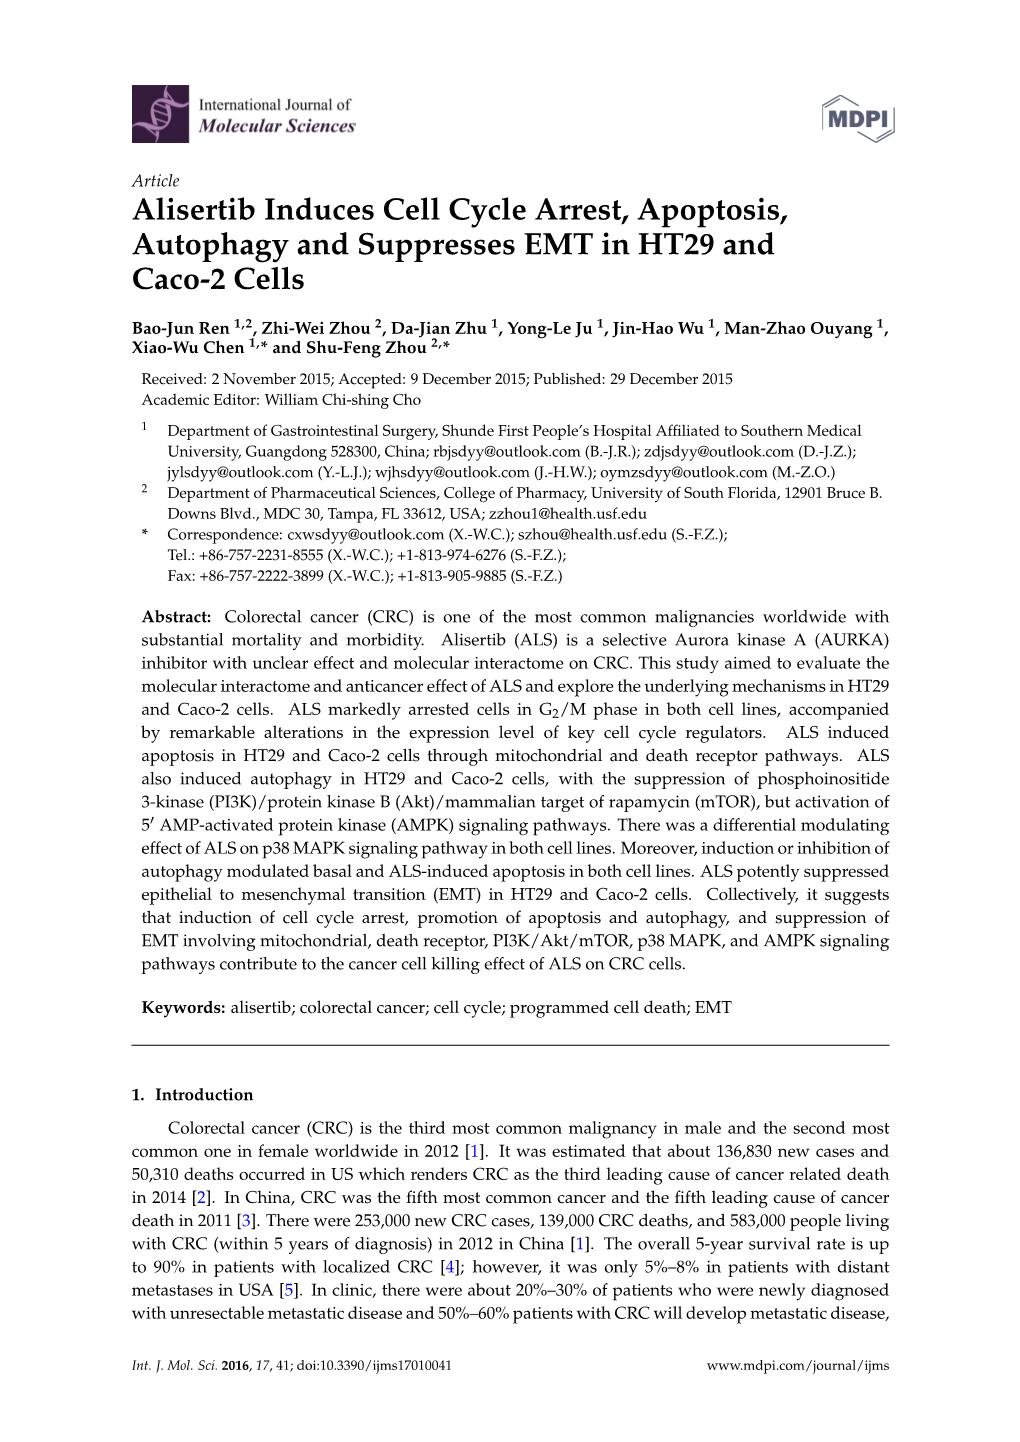 Alisertib Induces Cell Cycle Arrest, Apoptosis, Autophagy and Suppresses EMT in HT29 and Caco-2 Cells